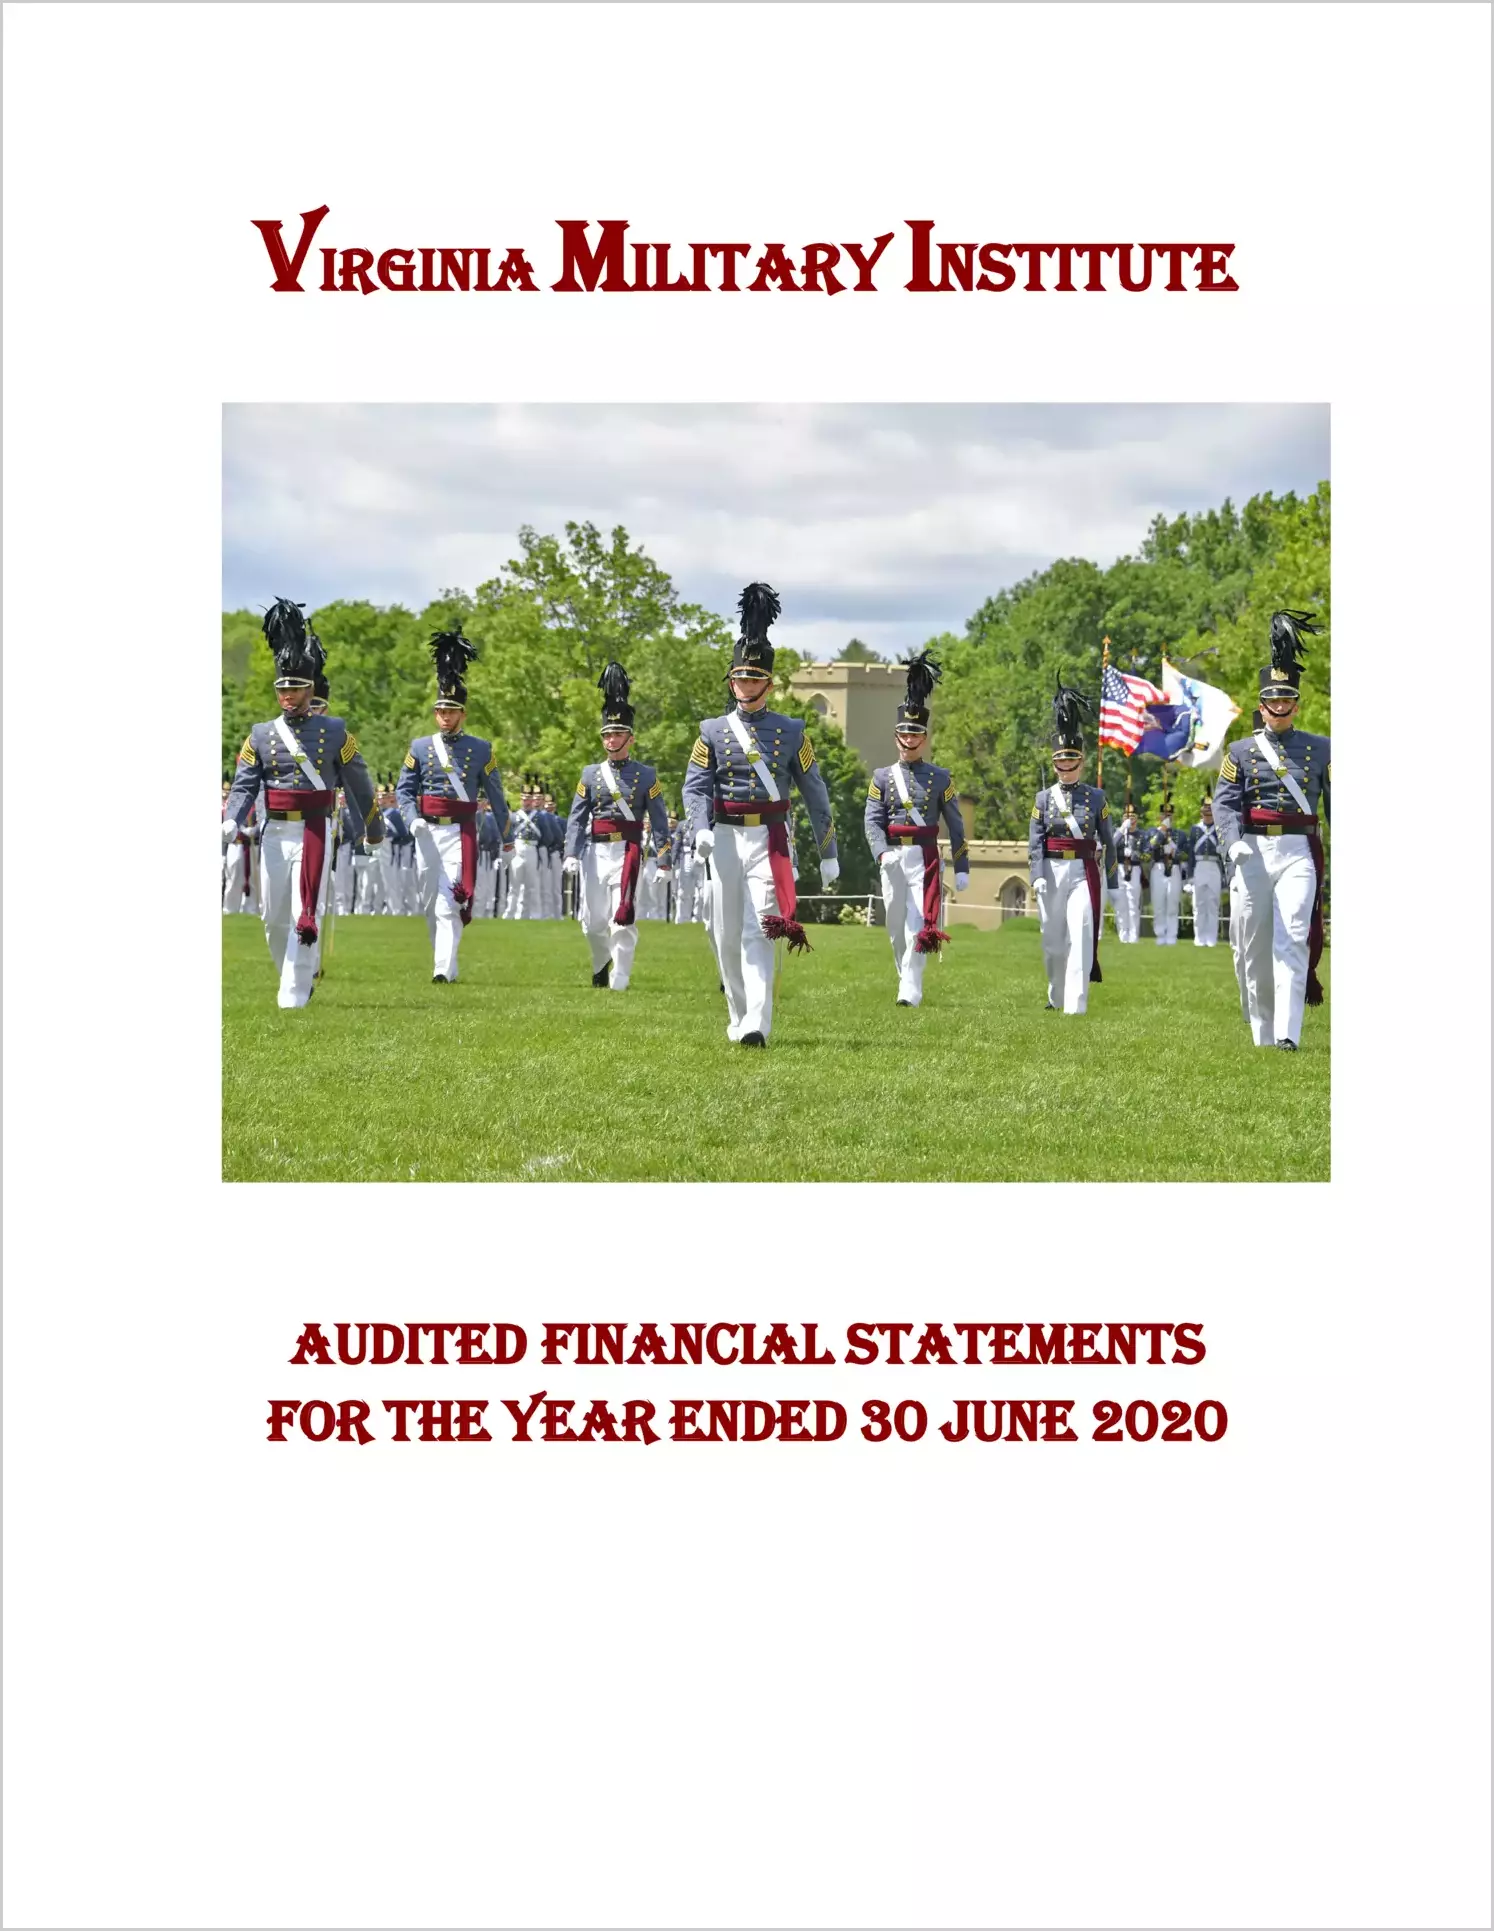 Virginia Military Institute Financial Statements for the year ending June 30, 2020